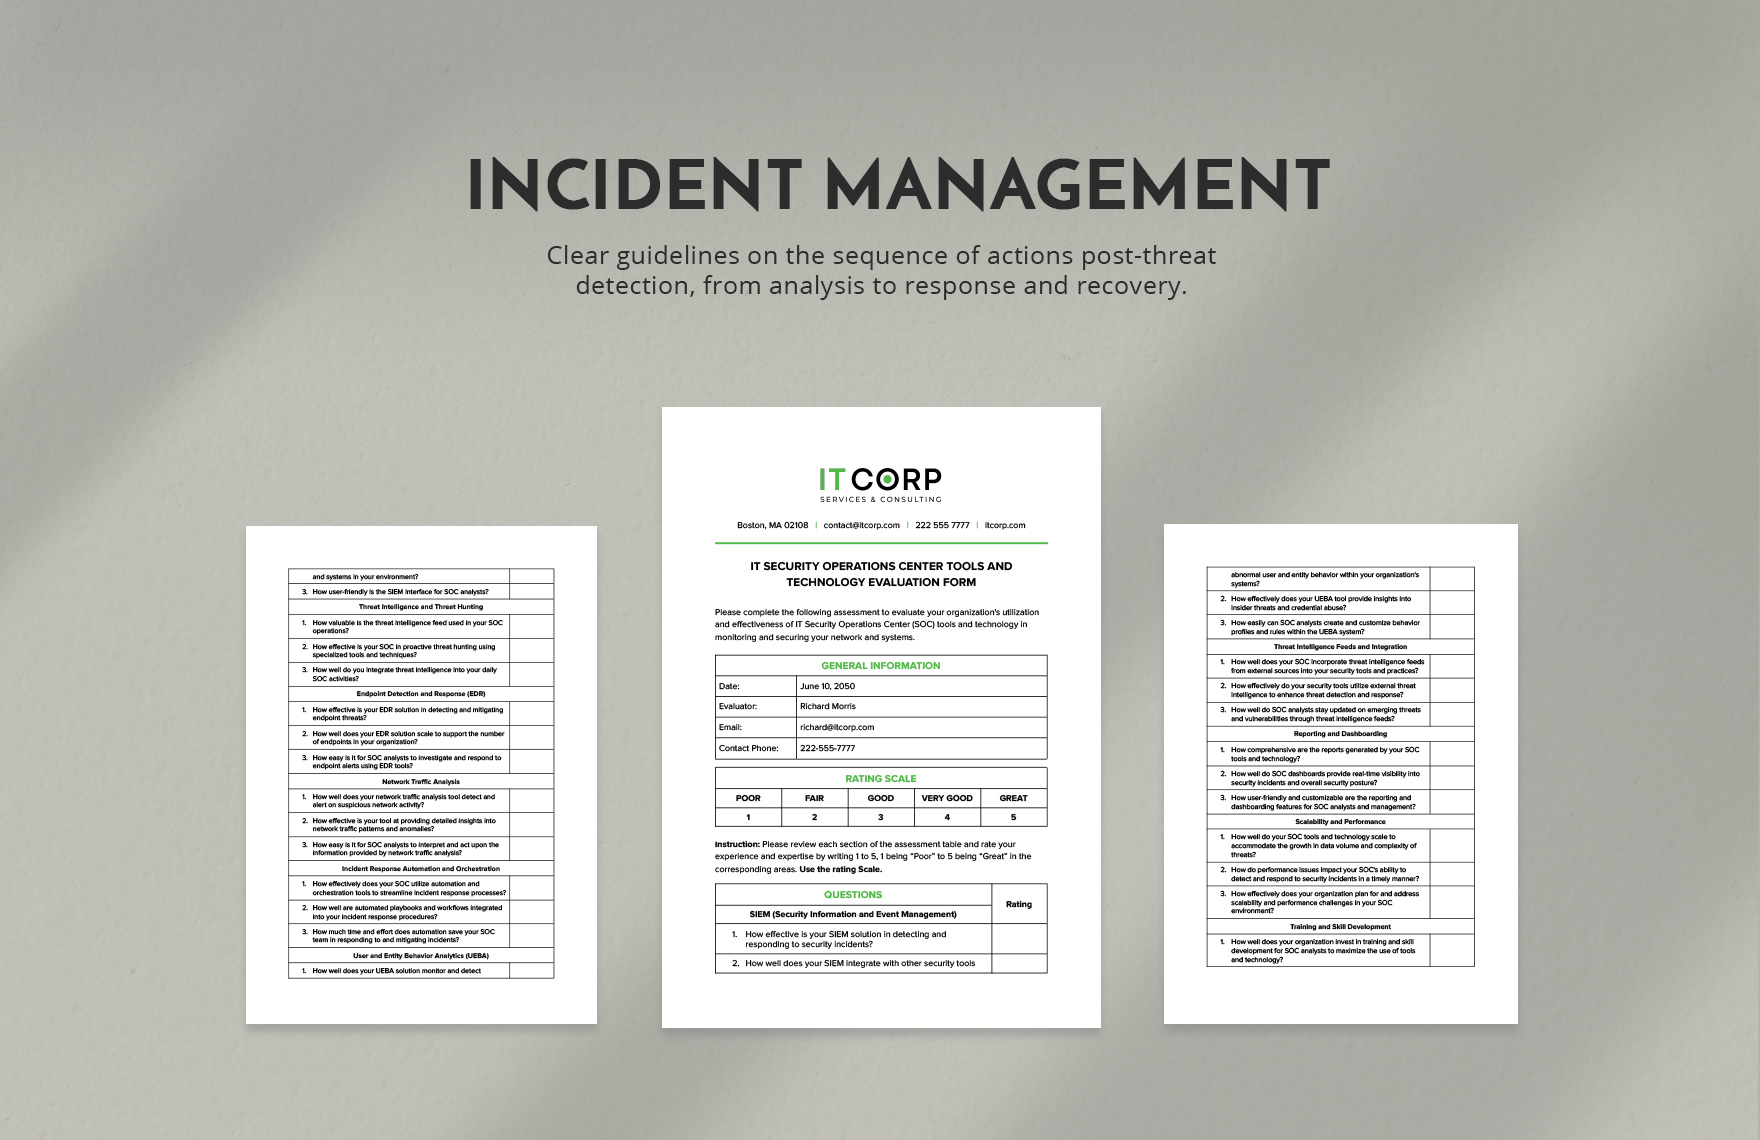 IT Security Operations Center Tools and Technology Evaluation Form Template